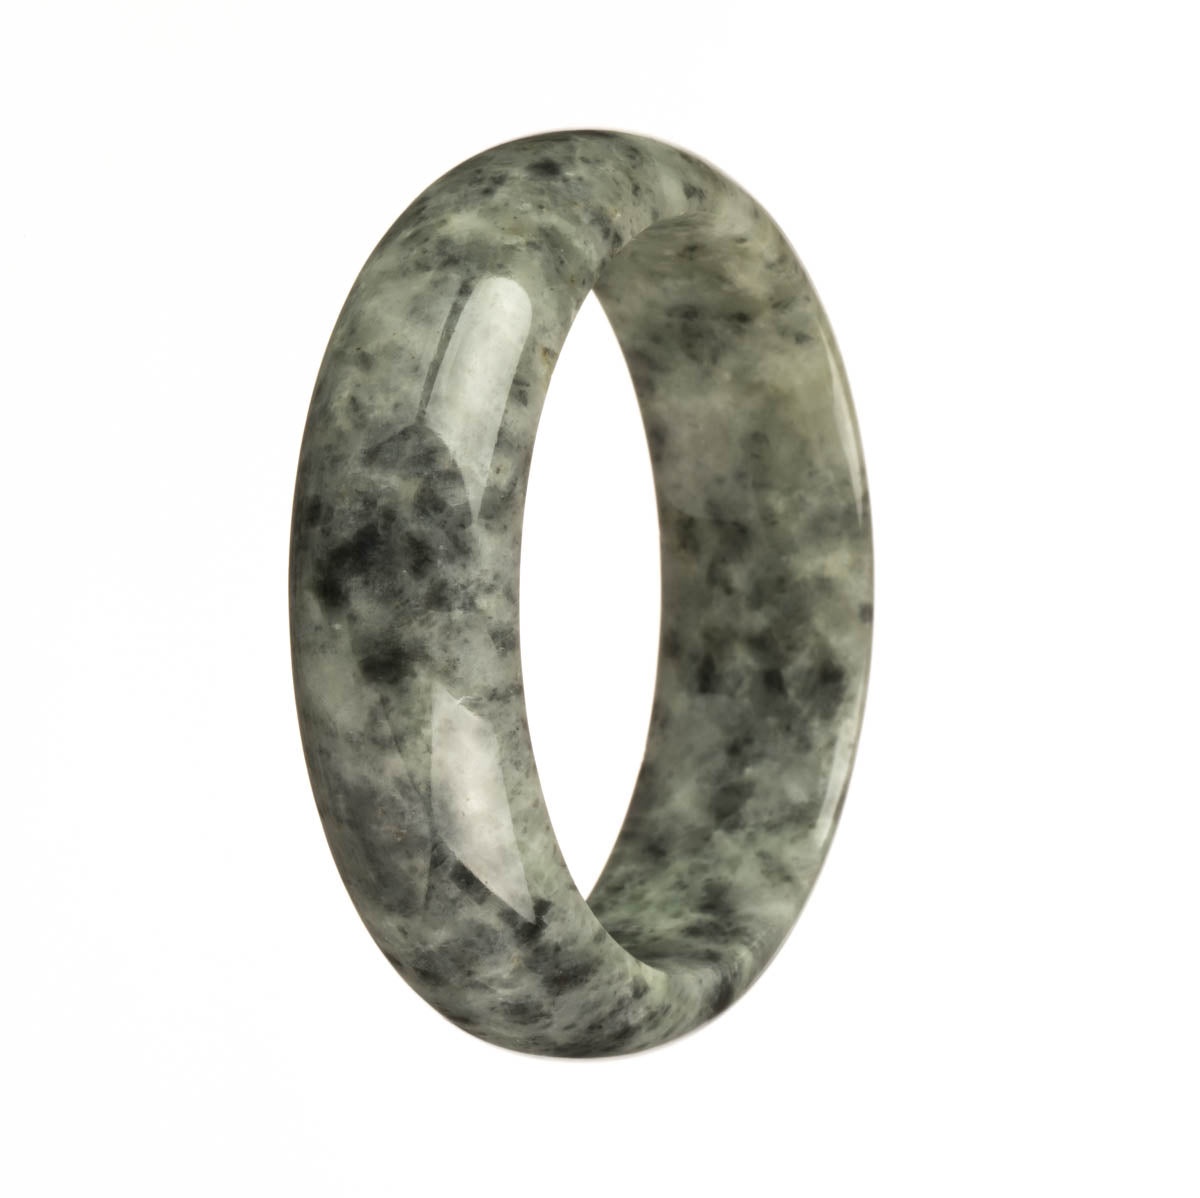 A half moon-shaped traditional jade bangle bracelet in a natural grey pattern.